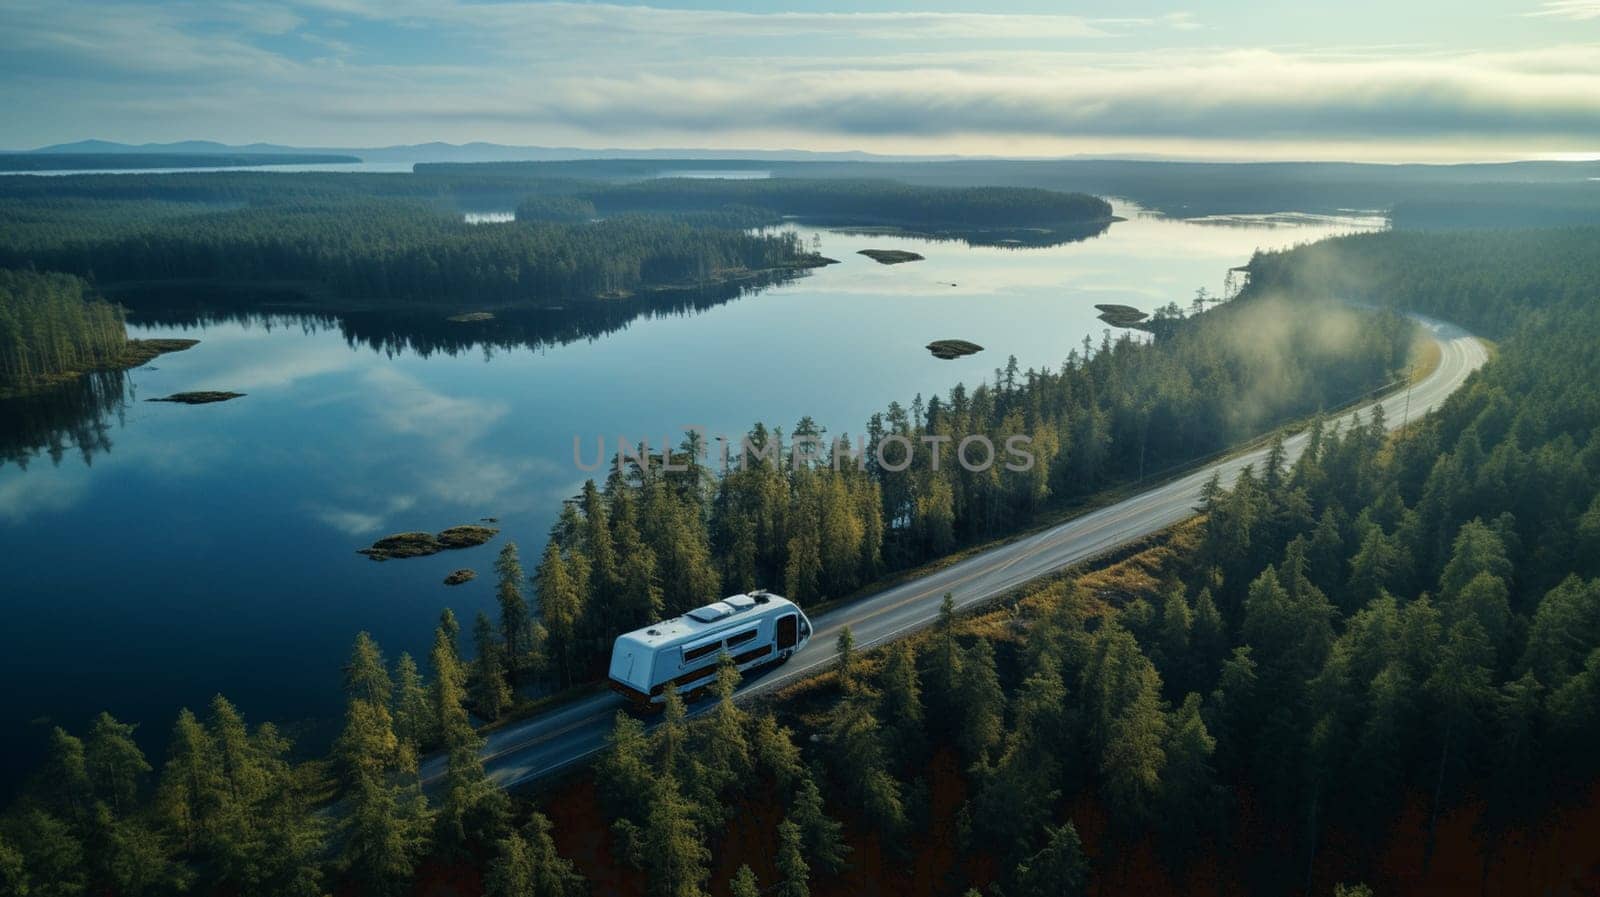 Aerial view of unlimited space of forest plain and car which are riding on highway. Asphalt road between green fir and pine trees with snow under cloudy sky. by Andelov13